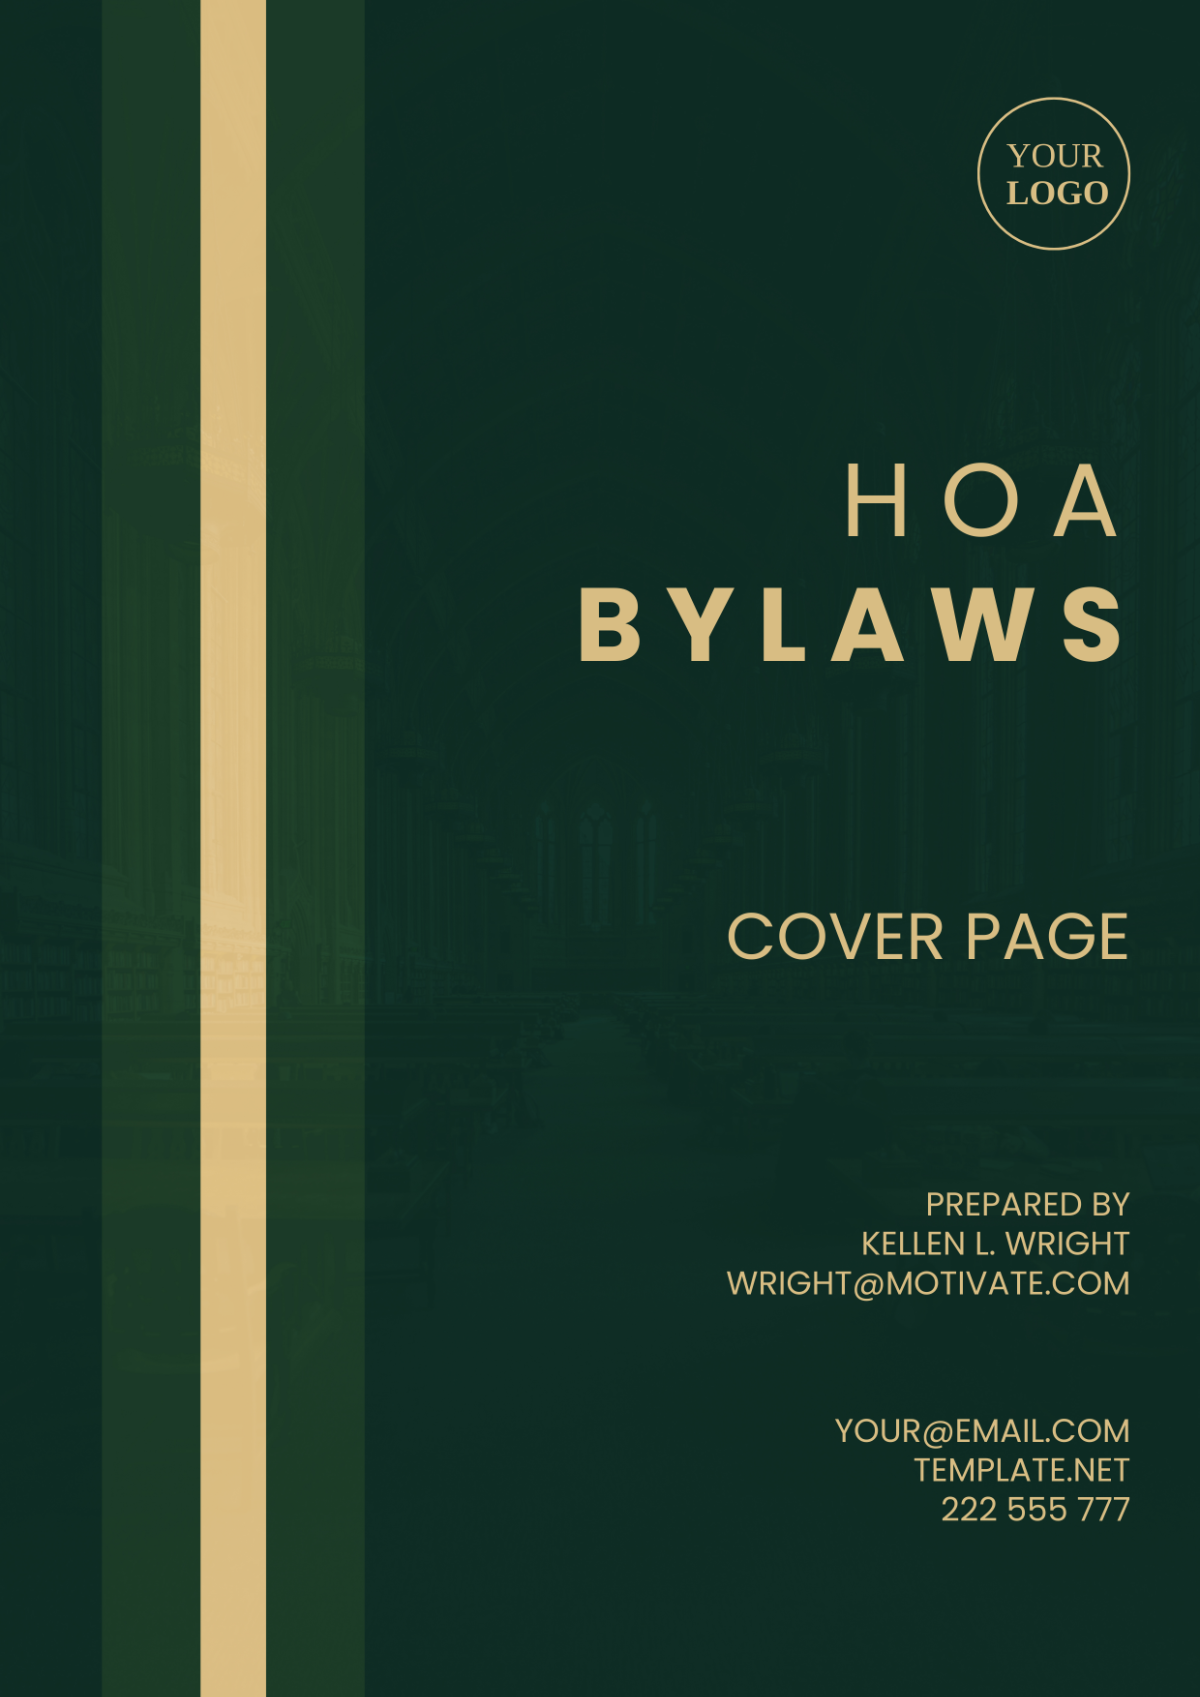 HOA Bylaws Cover Page Template